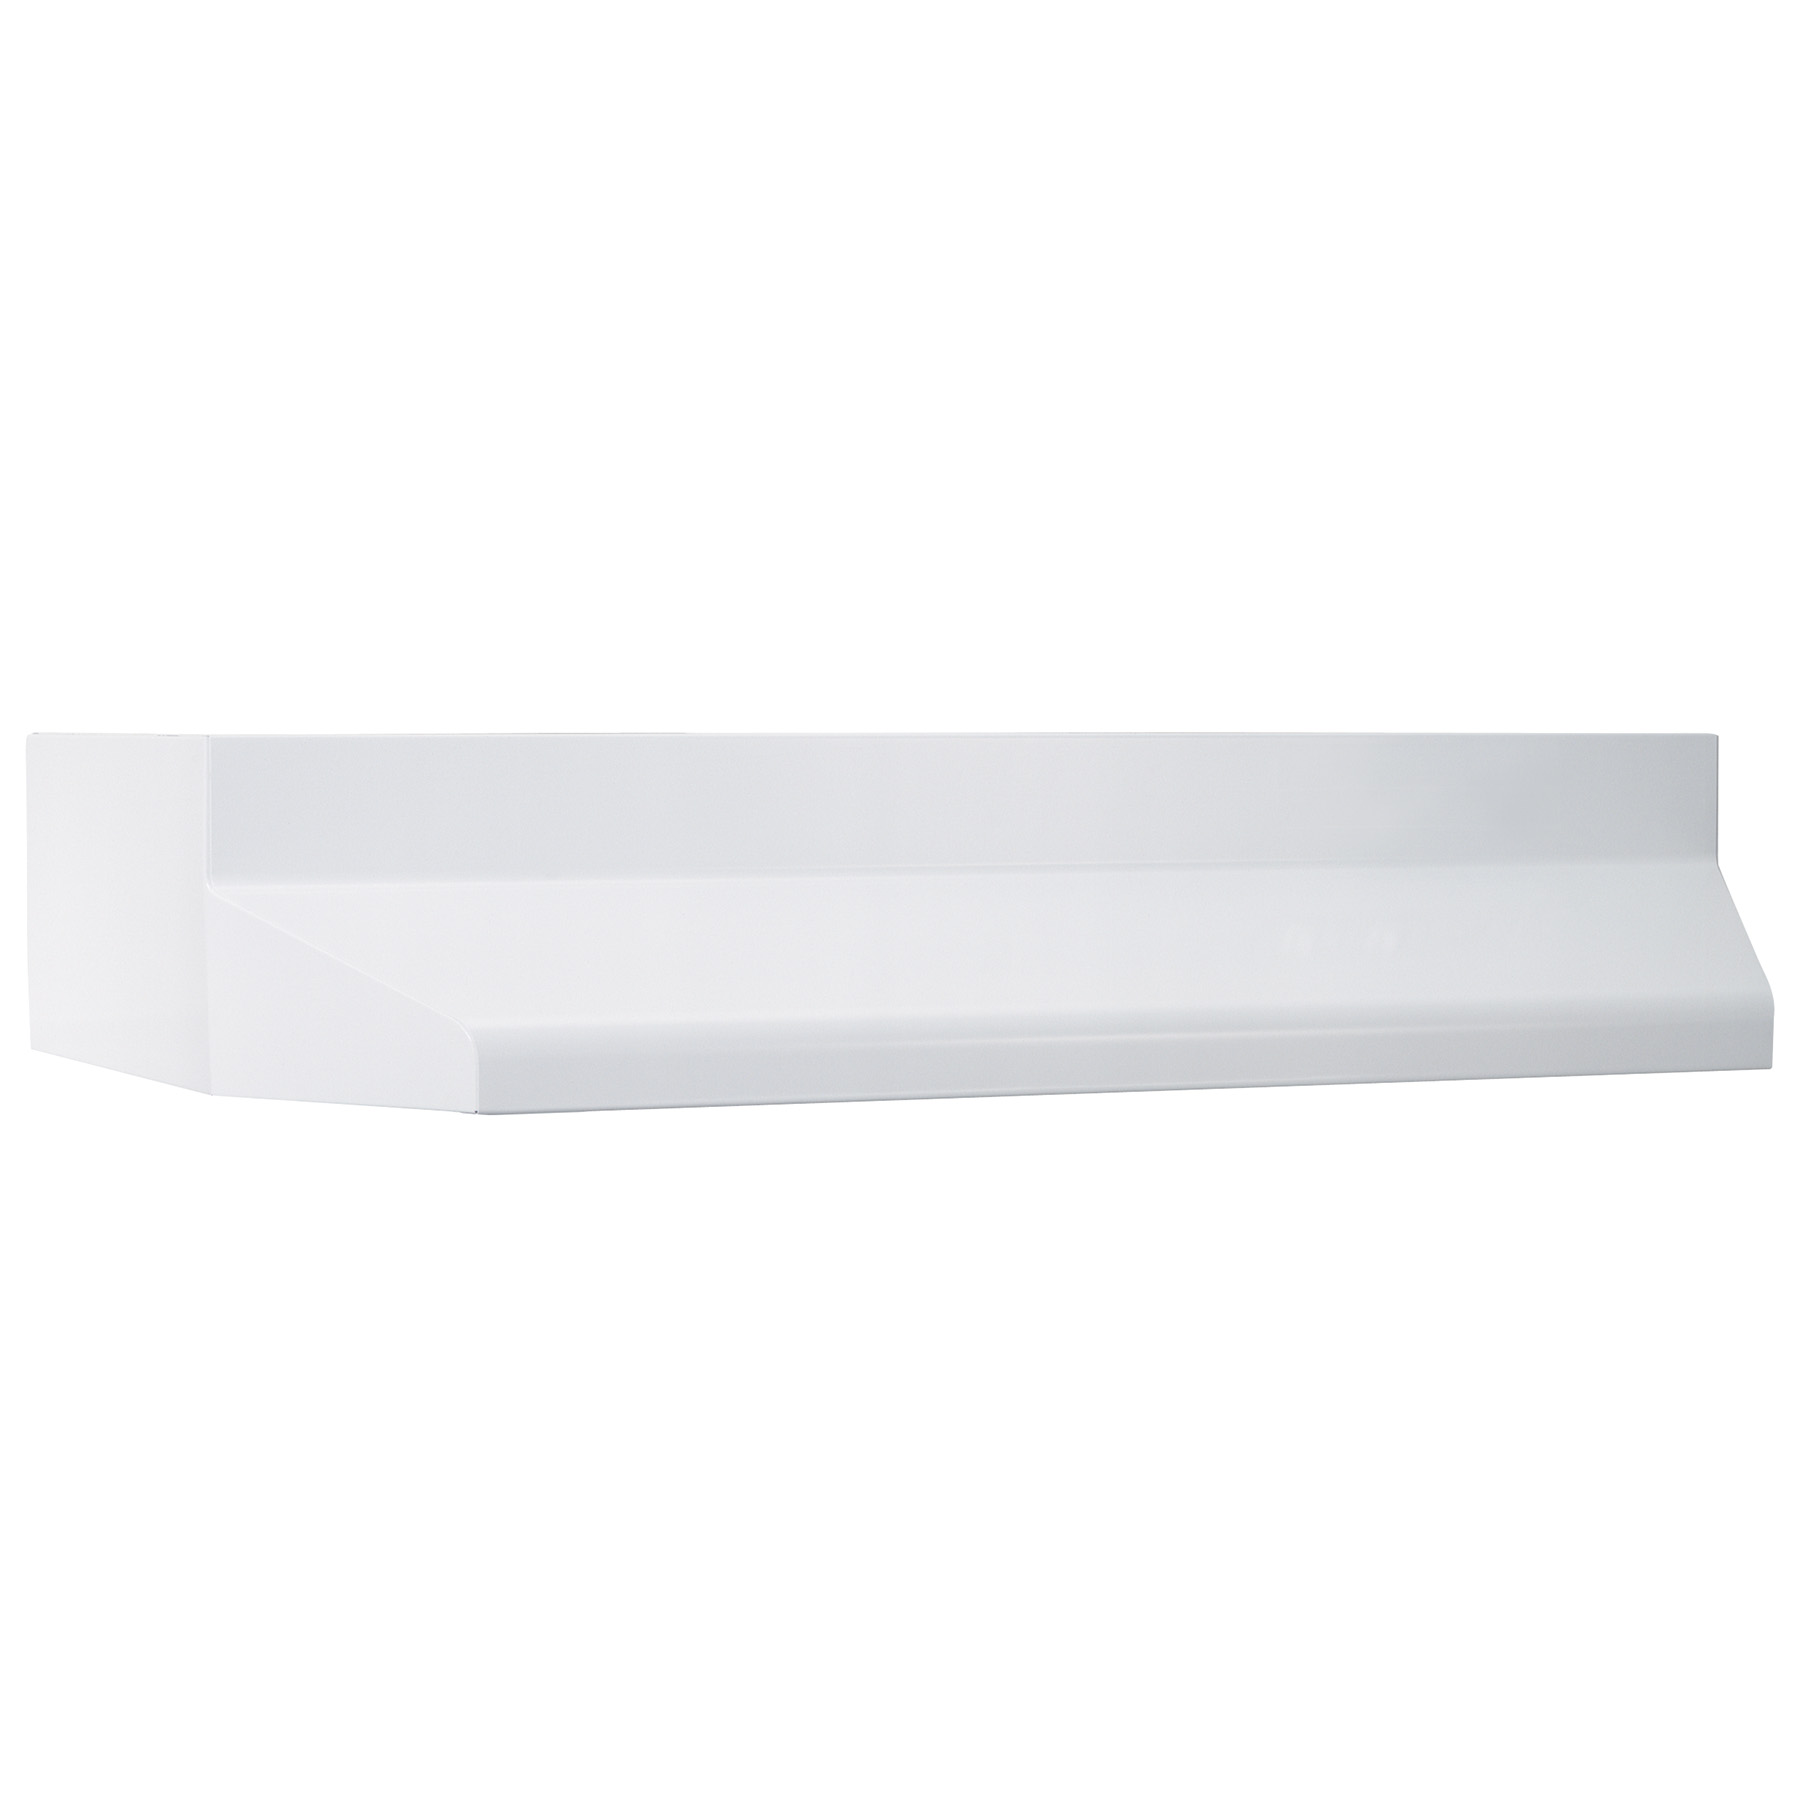 **DISCONTINUED**Broan® 37000 Series 30-Inch Range Hood Shell in White